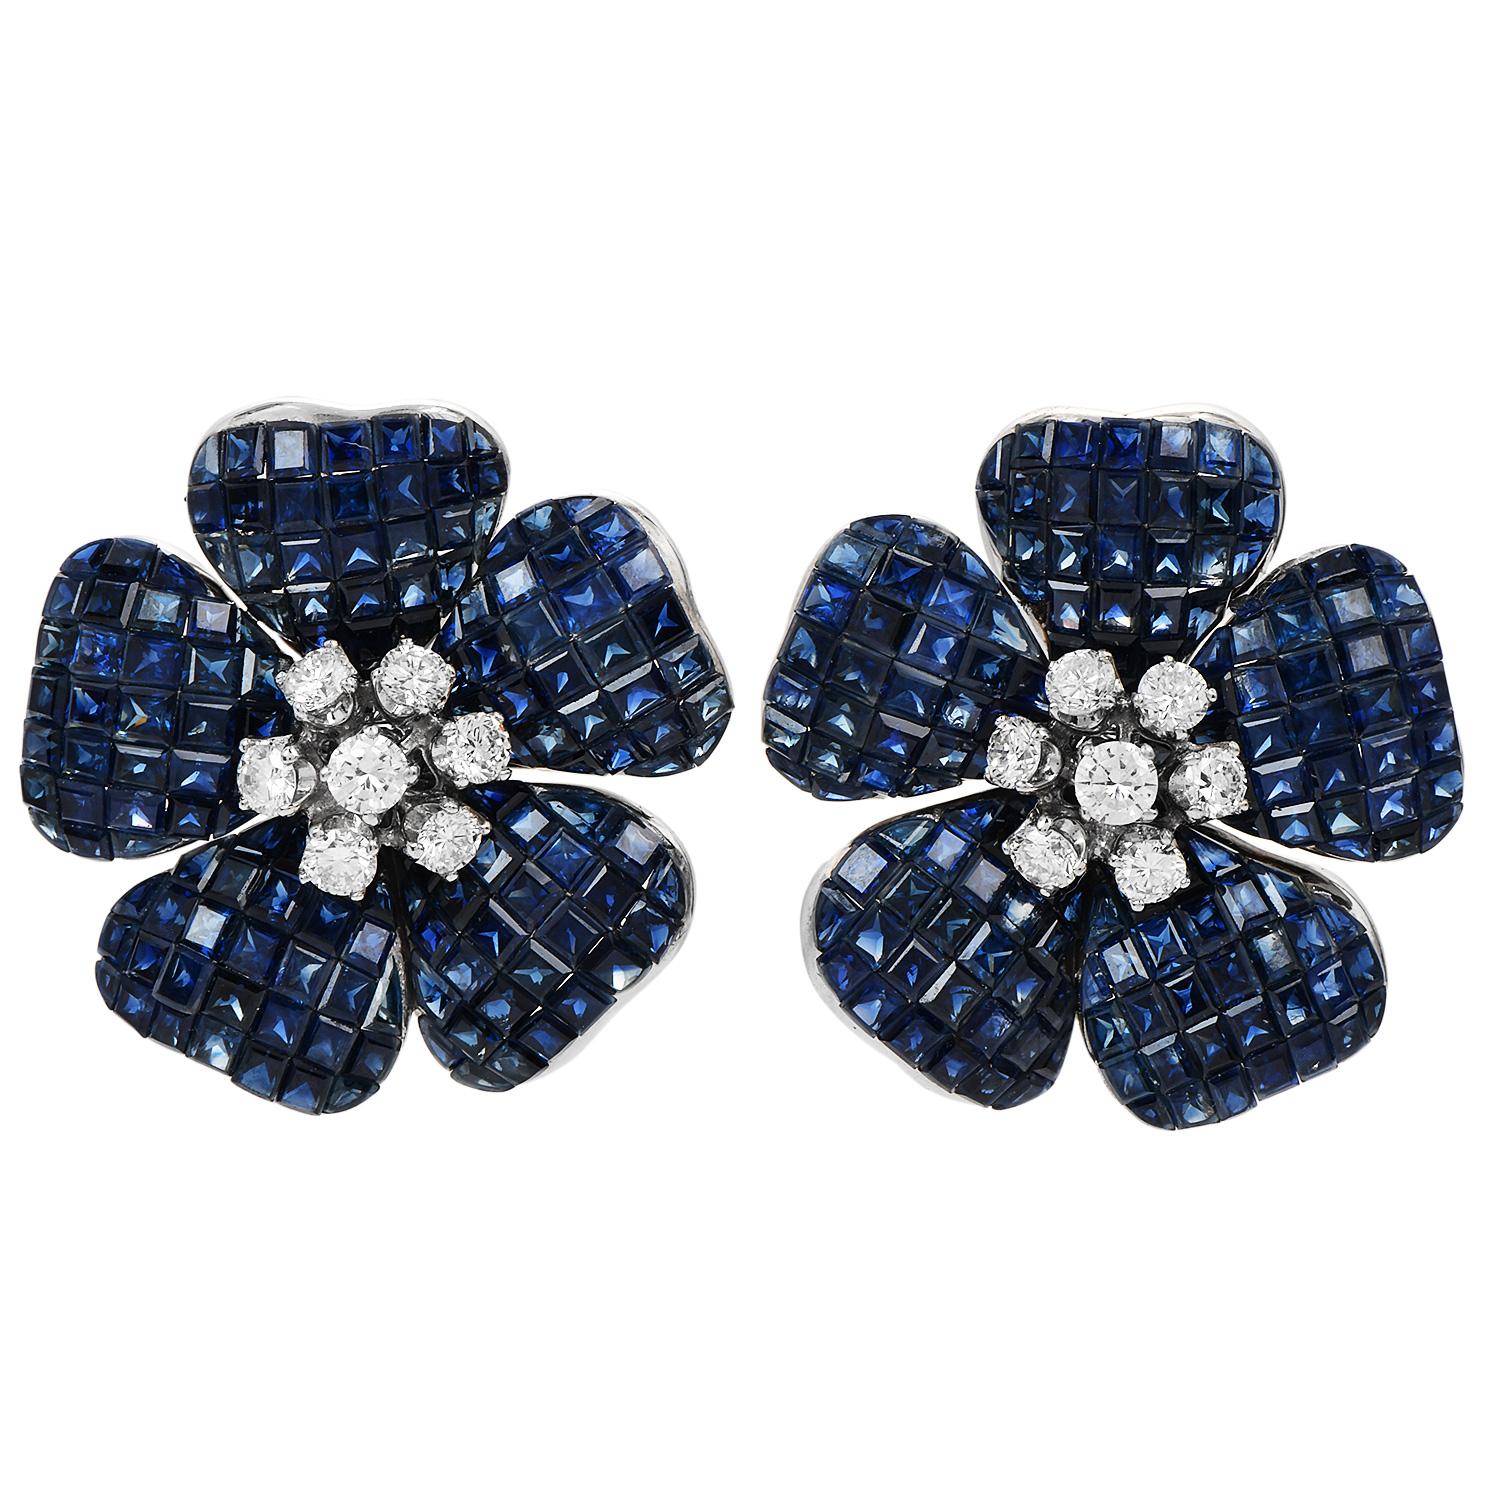 The Vintage Diamond Blue Sapphire 18K White Gold Flower Clip-On Earrings are a stunning pair of earrings that exude elegance and sophistication.

Crafted in 18K white gold, these earrings boast a timeless appeal and a lustrous shine.

The focal